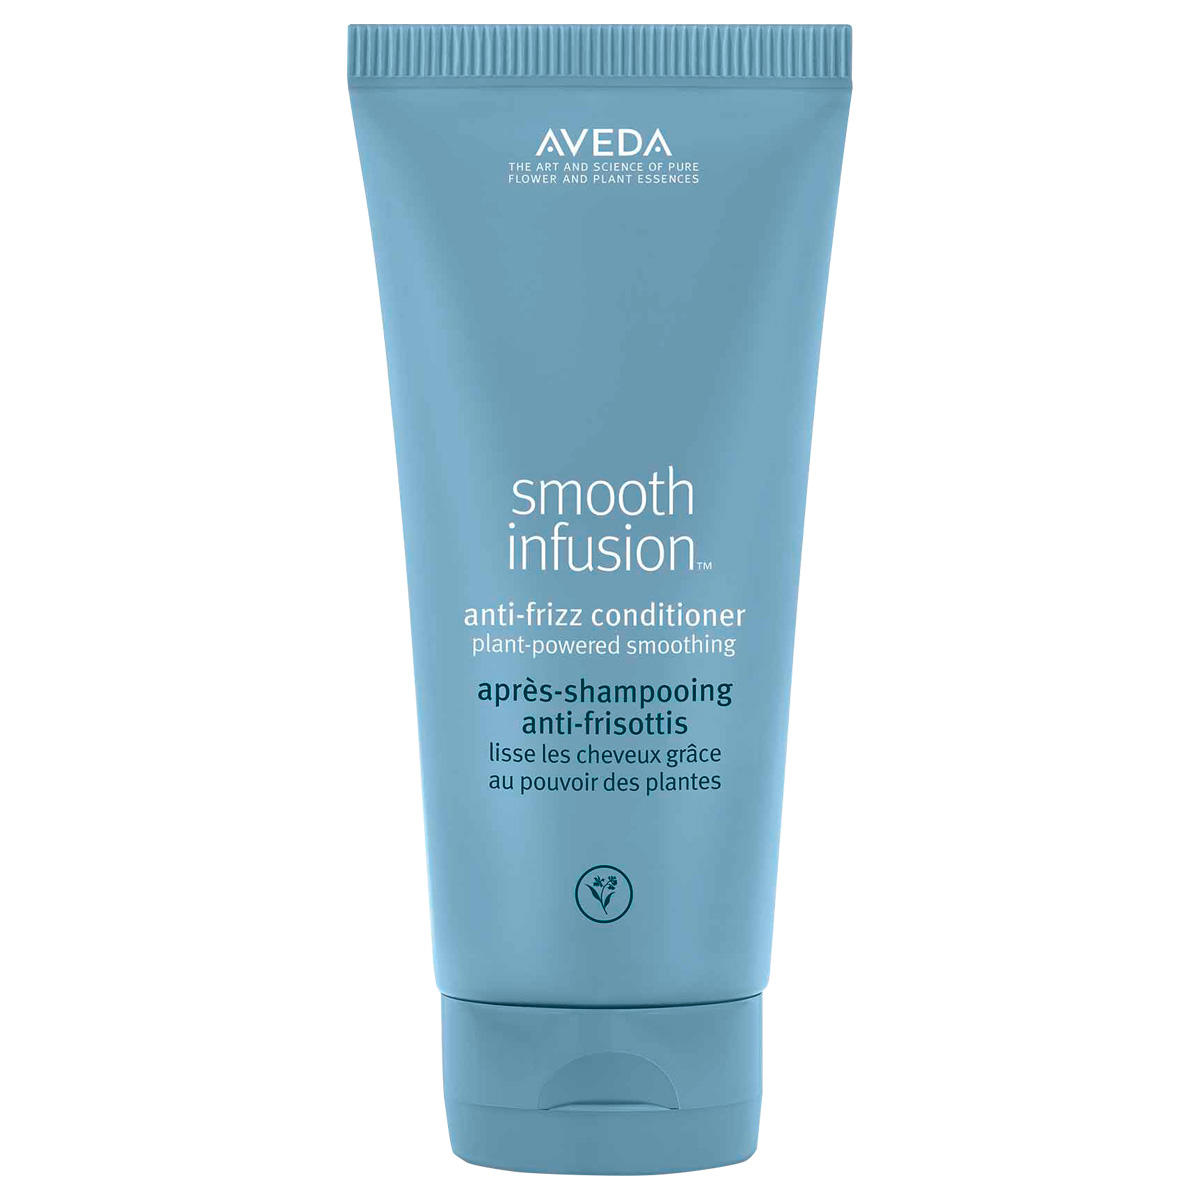 AVEDA Smooth Infusion Anti-Frizz Conditioner  - 1